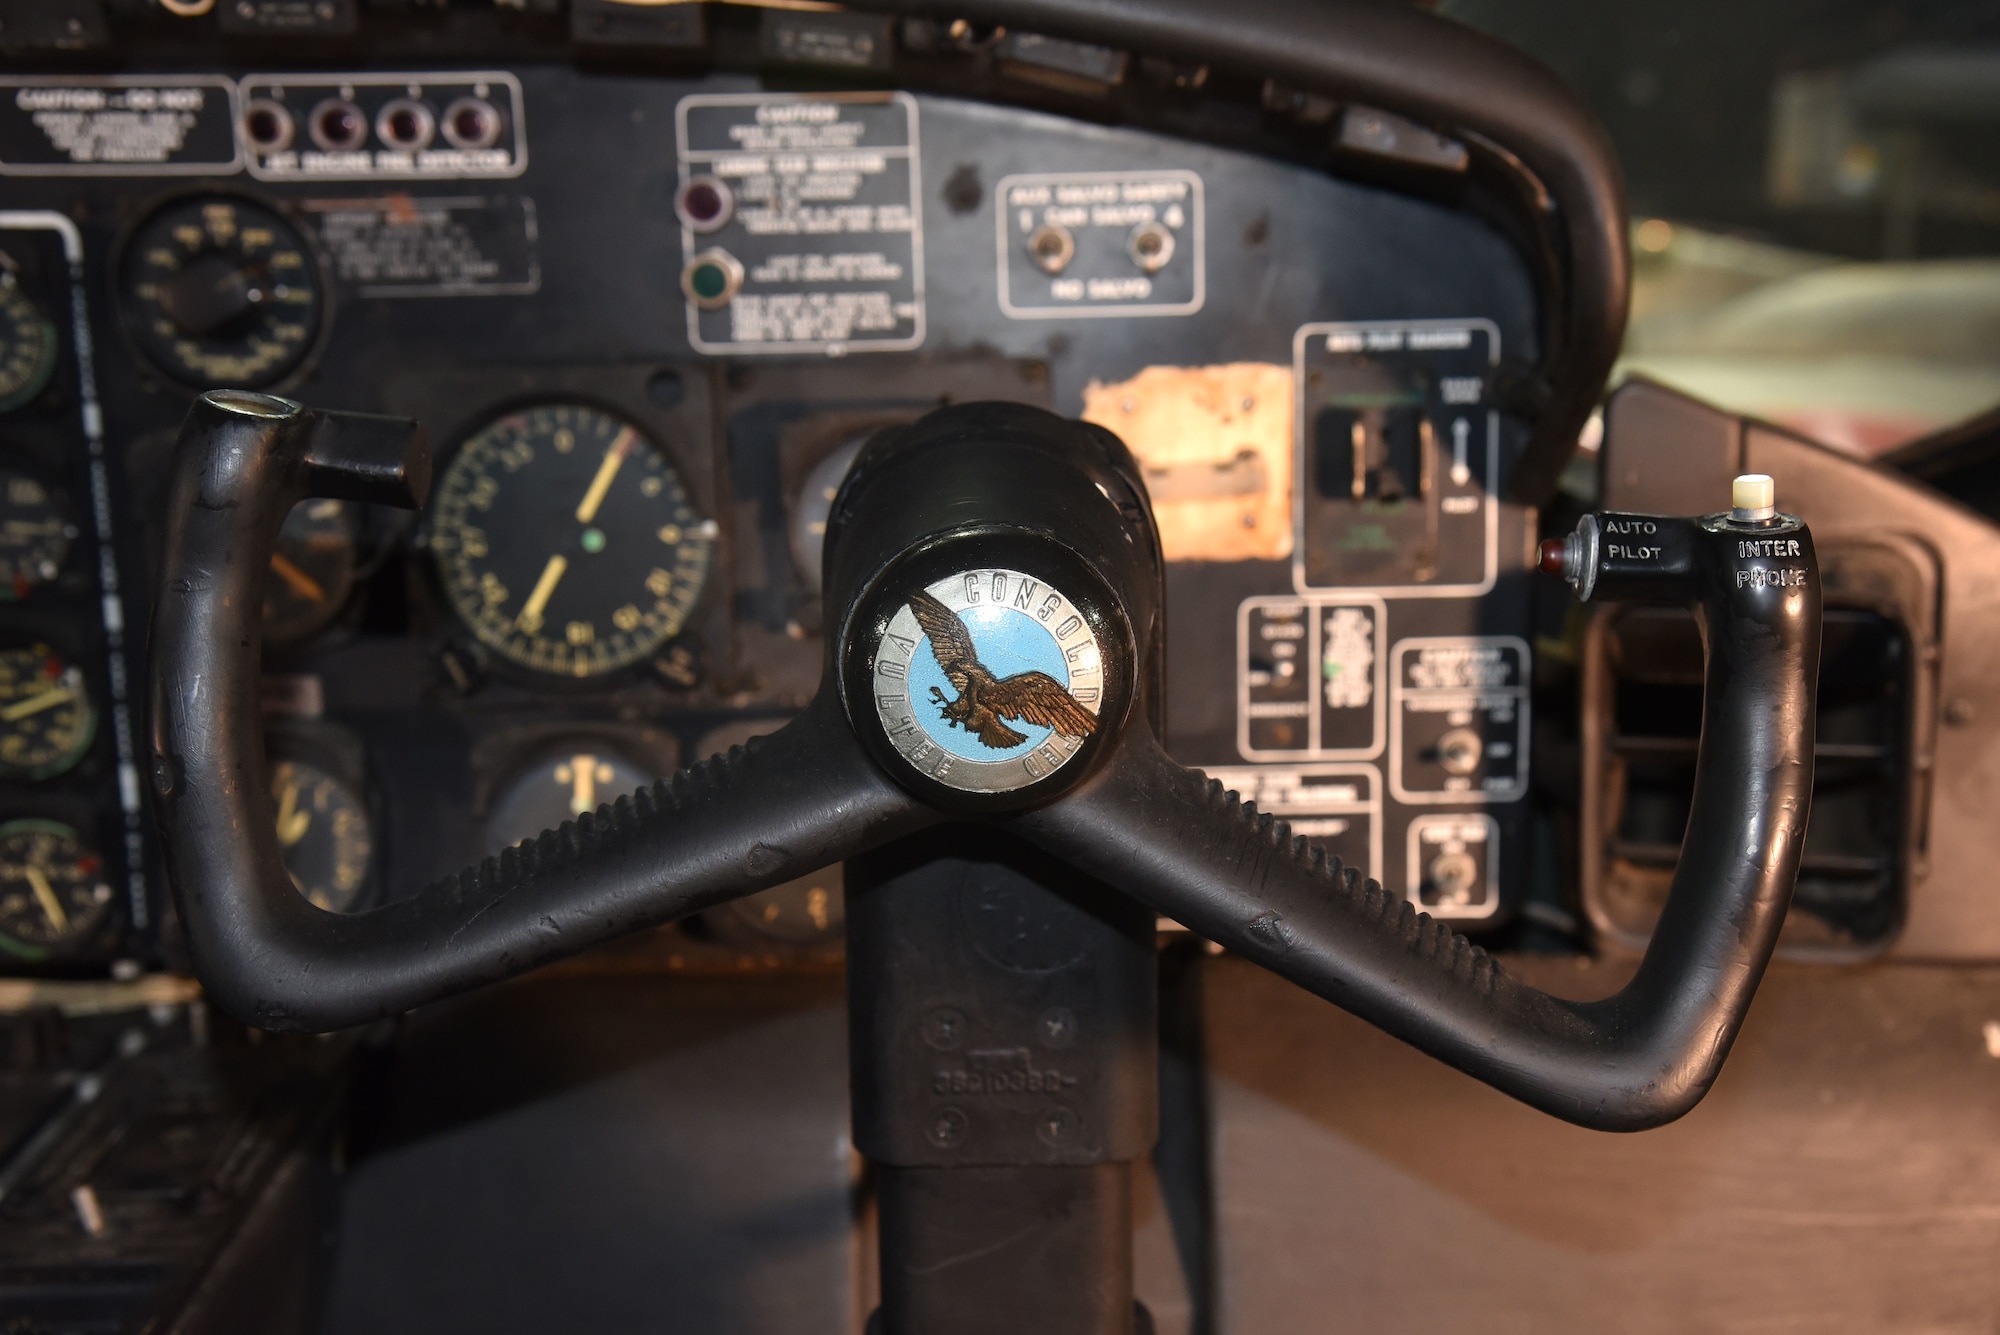 DAYTON, Ohio - Convair B-36J Peacemaker co-pilot station at the National Museum of the U.S. Air Force. (U.S. Air Force photo by Ken LaRock)